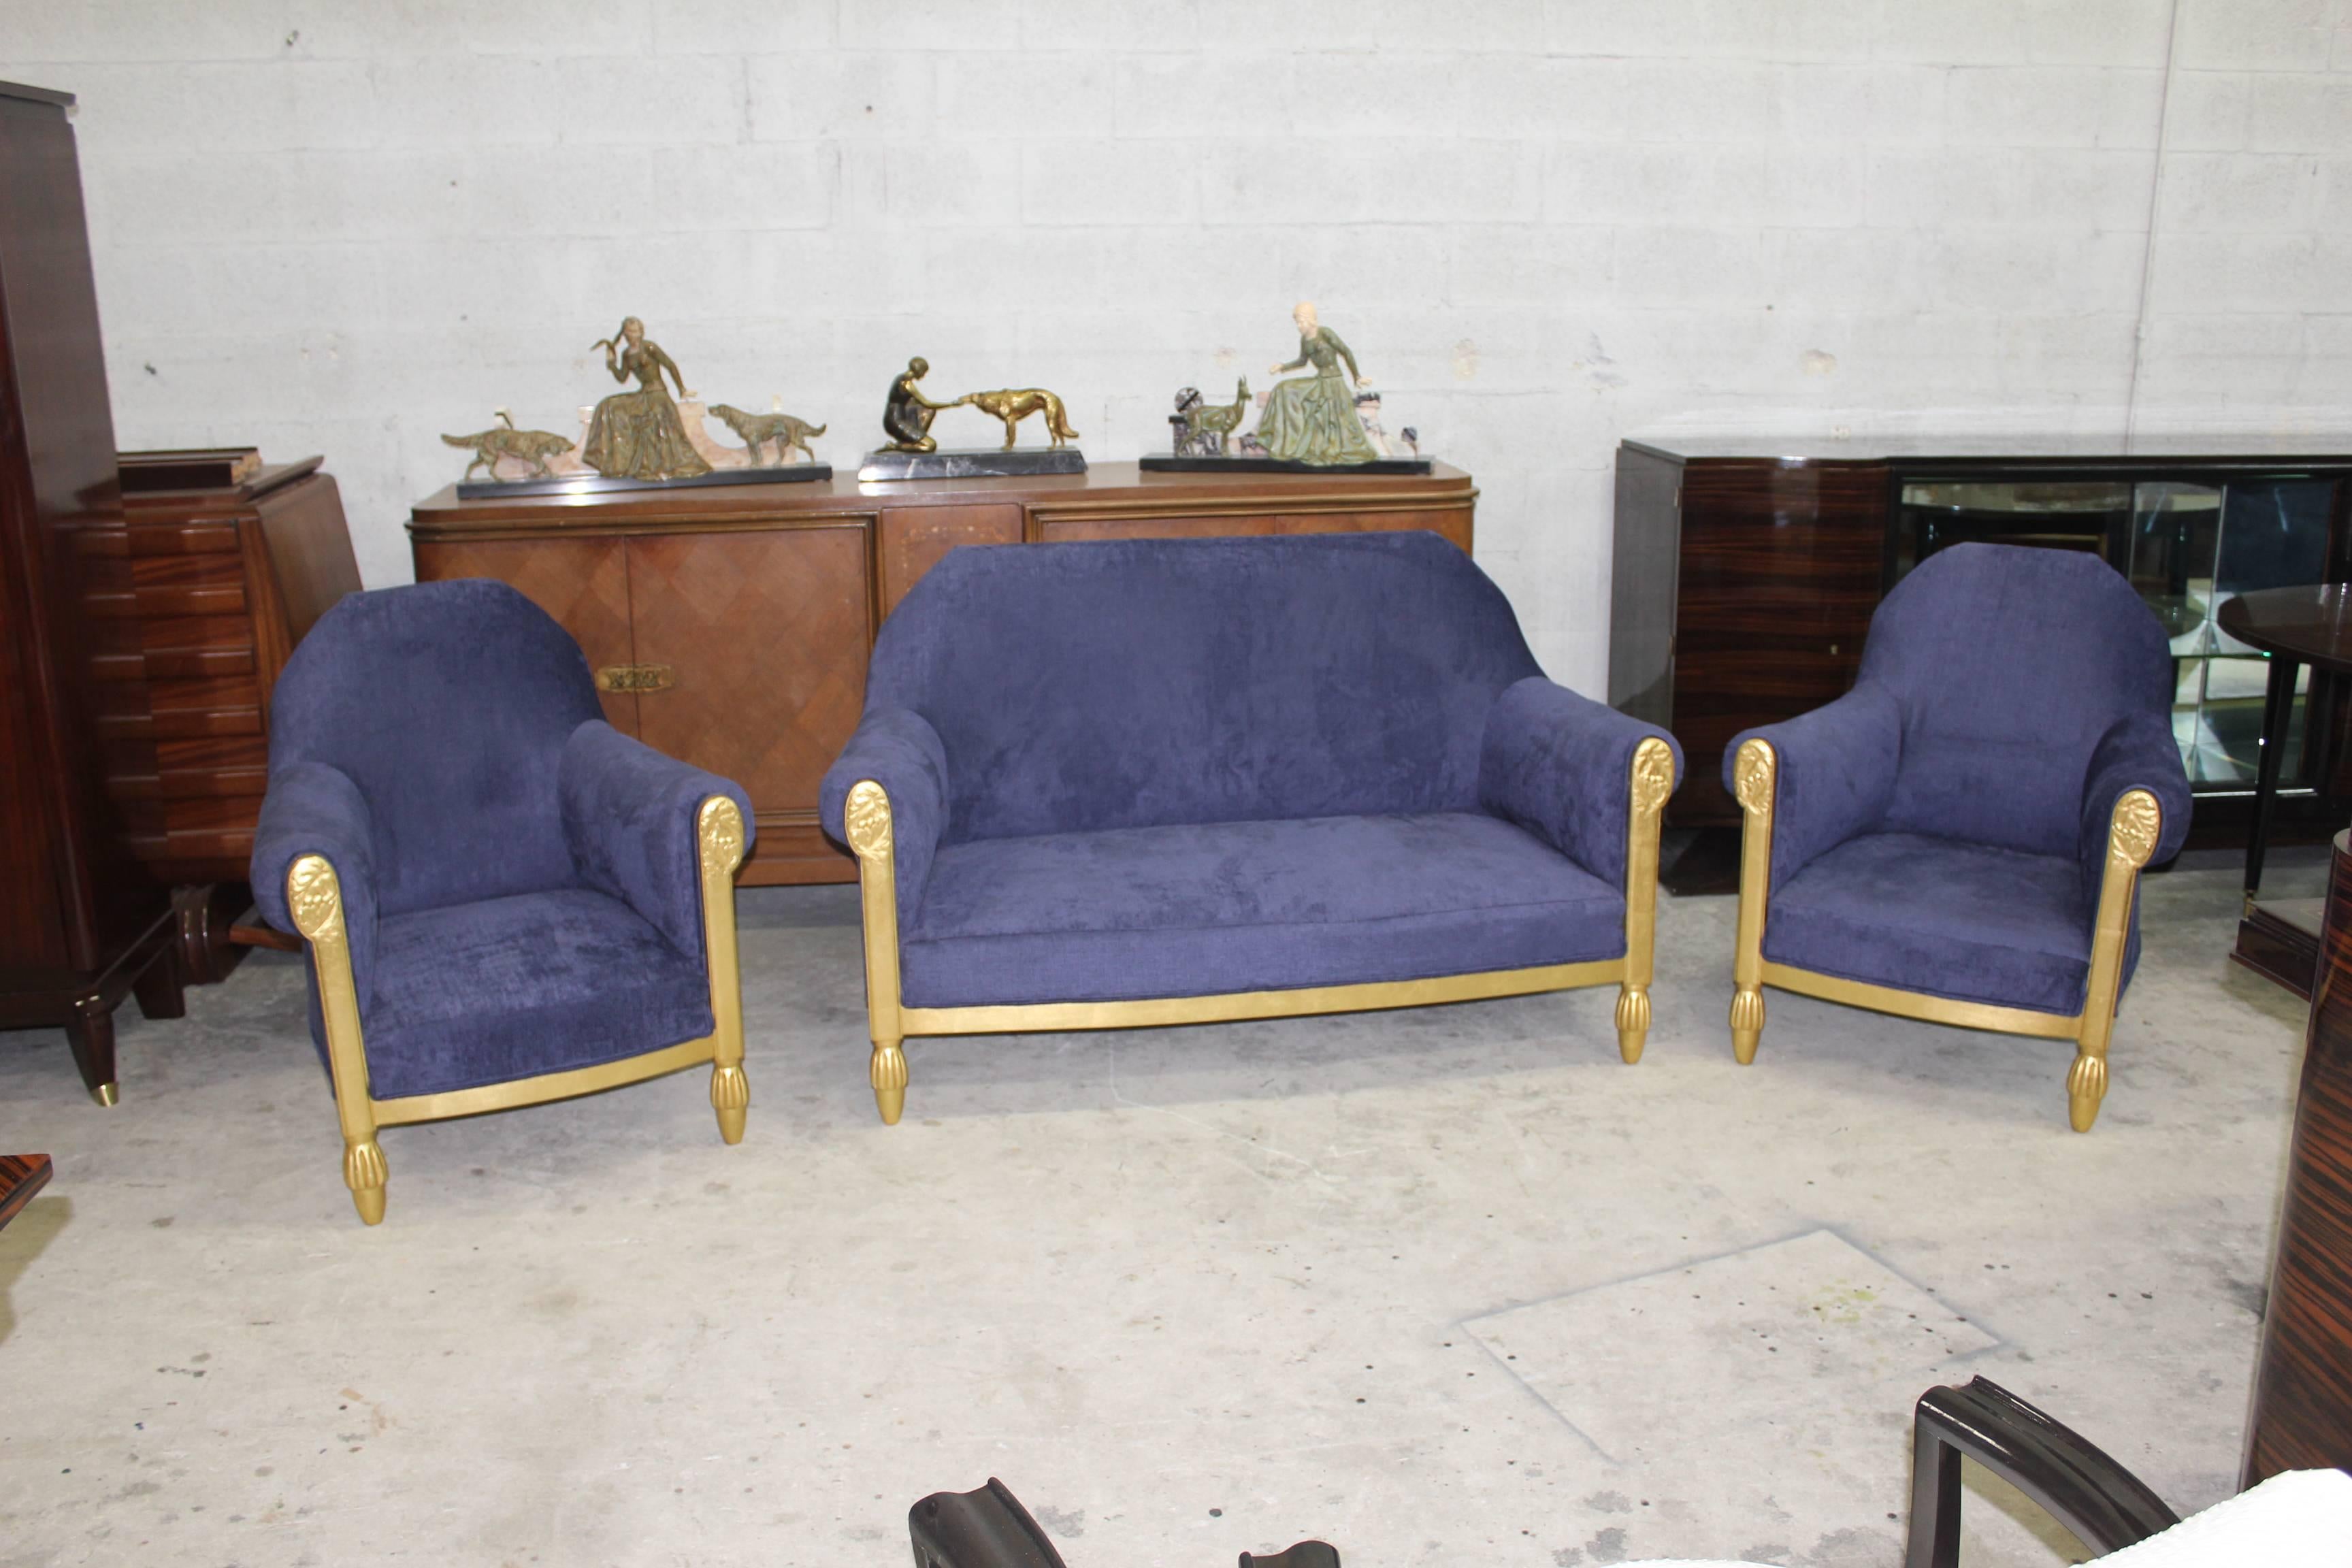 We present an elegant, complete seating suite by one of the most important designers of the Art Deco period- Paul Follot. Included are a charming settee with gilded wood and decorative carved panels, two matching chairs in the Classic early 1920s ,